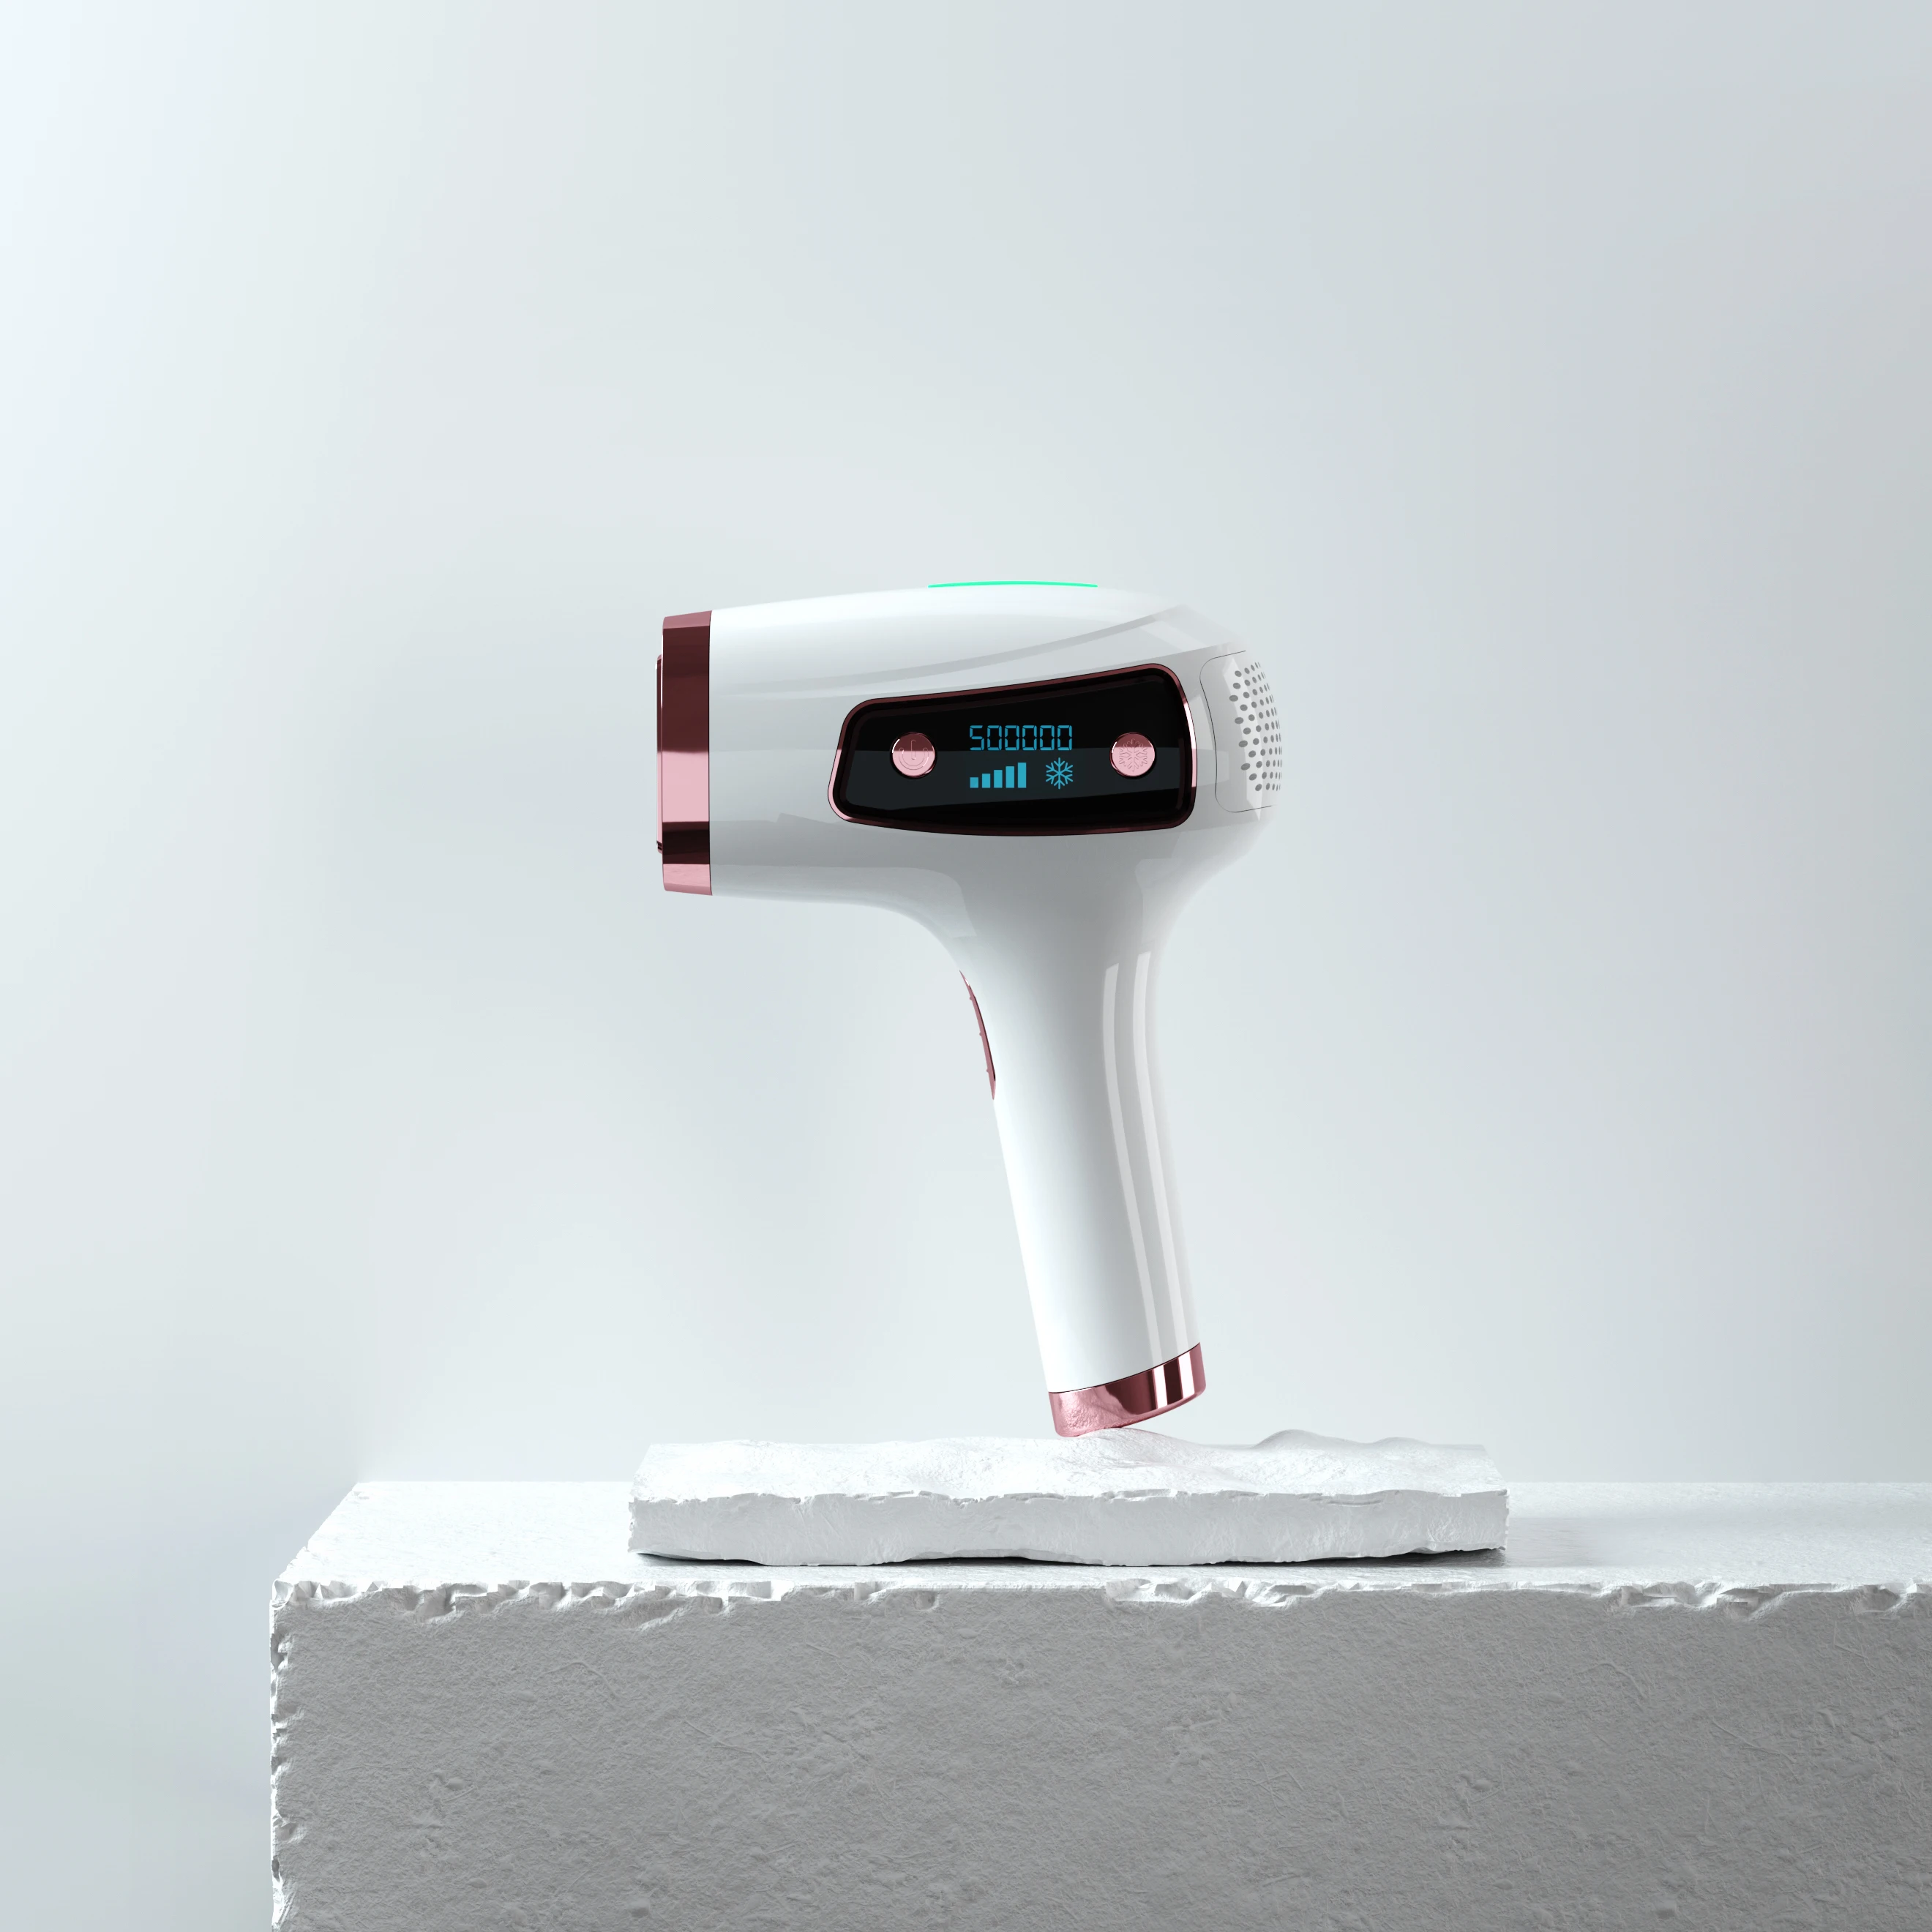 Mlay Home Use OEM T8 IPL Laser Hair Removal Machine Rechargeable with UK JP Plugs Targets Face Body Bikini Armpit Lips